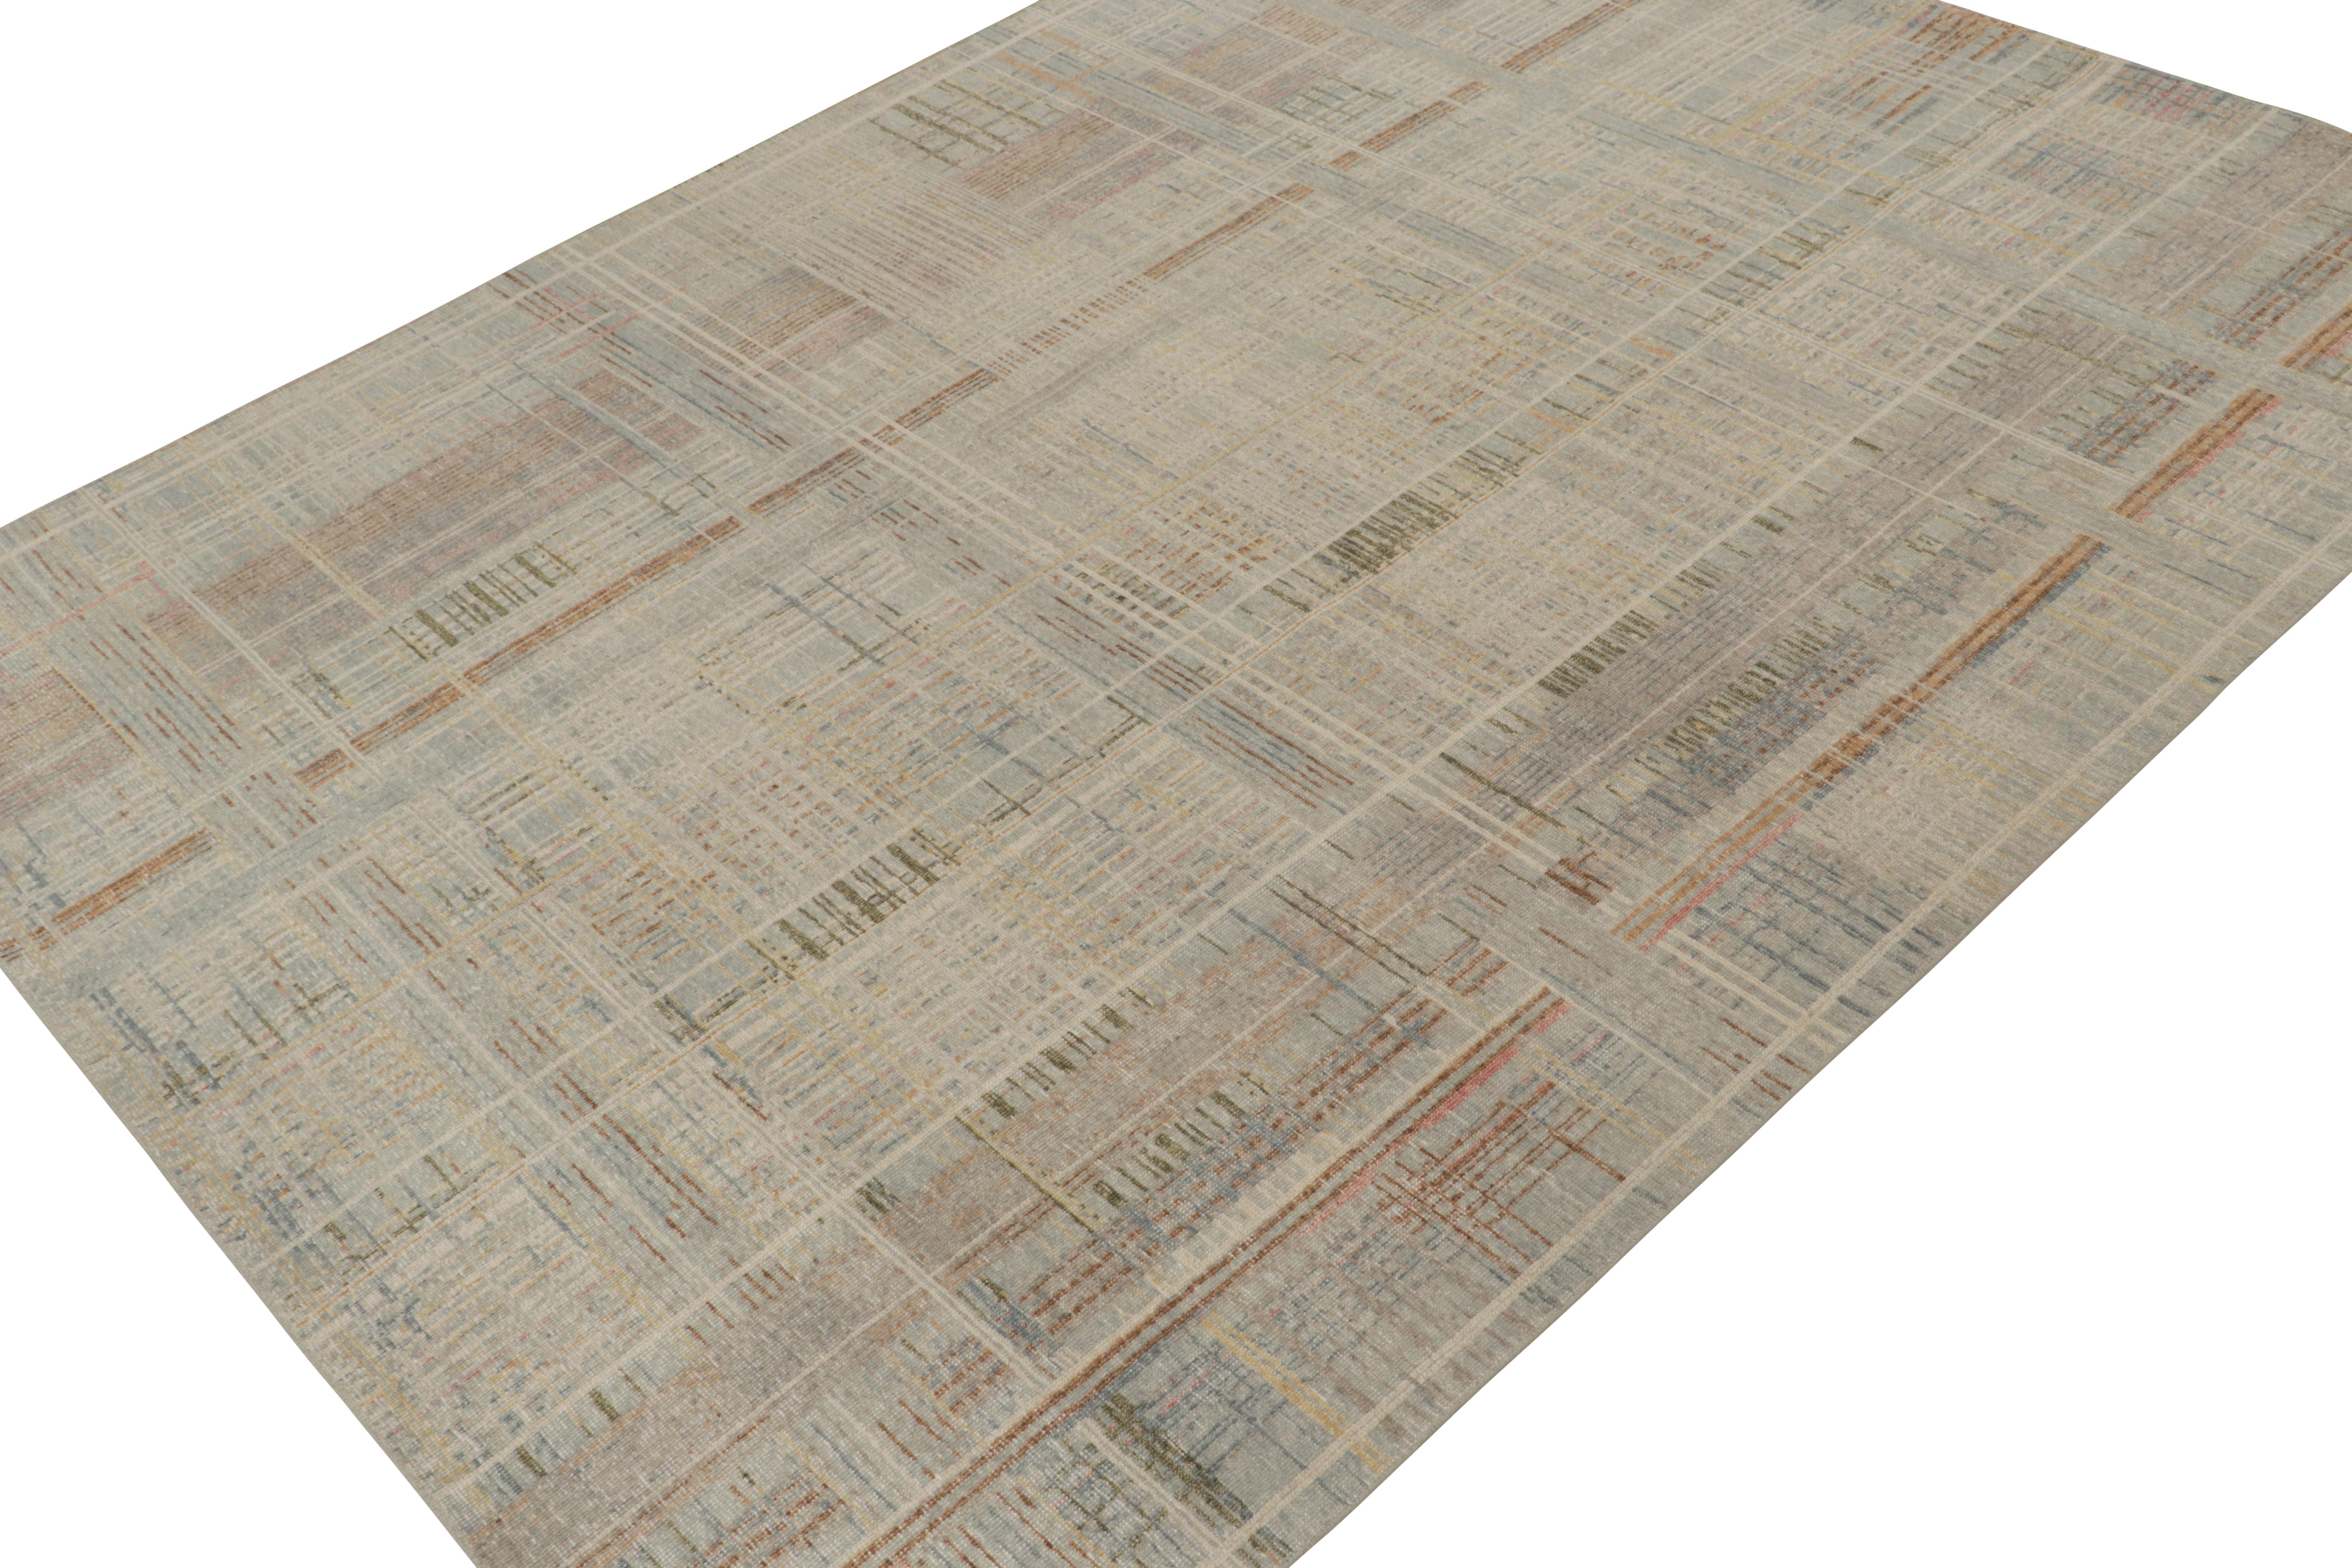 A 9x12 abstract rug, hand-knotted in distressed style wool and cotton from Rug & Kilim’s Homage Collection.

Further on the Design:

This design enjoys geometric patterns in tones of beige-brown, blue and gray that favor a brilliant, layered look.